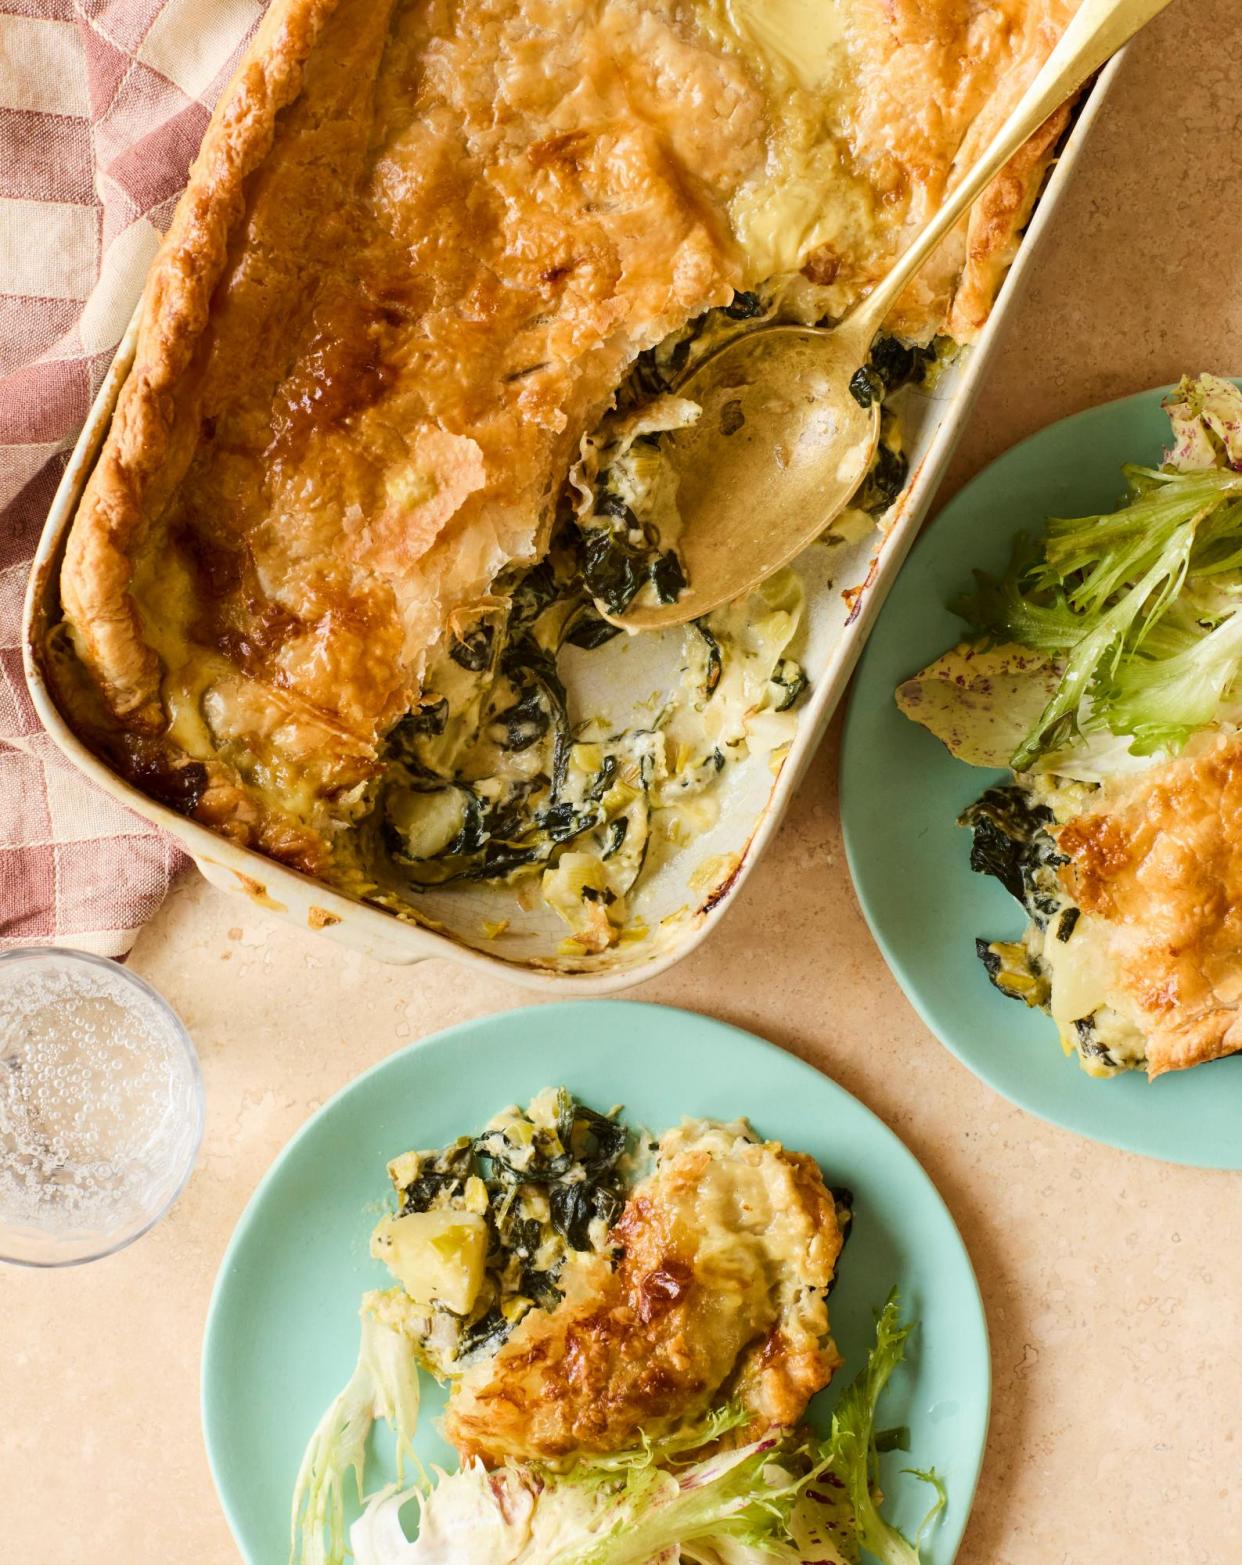 <span>Thomasina Miers’ leek, spinach and sheep’s cheese pie with rosemary garlic cream.</span><span>Photograph: Ola O Smit/The Guardian. Food styling: Sam Dixon. Prop styling: Anna Wilkins. Food styling assistant: Kristine Jakobssen.</span>